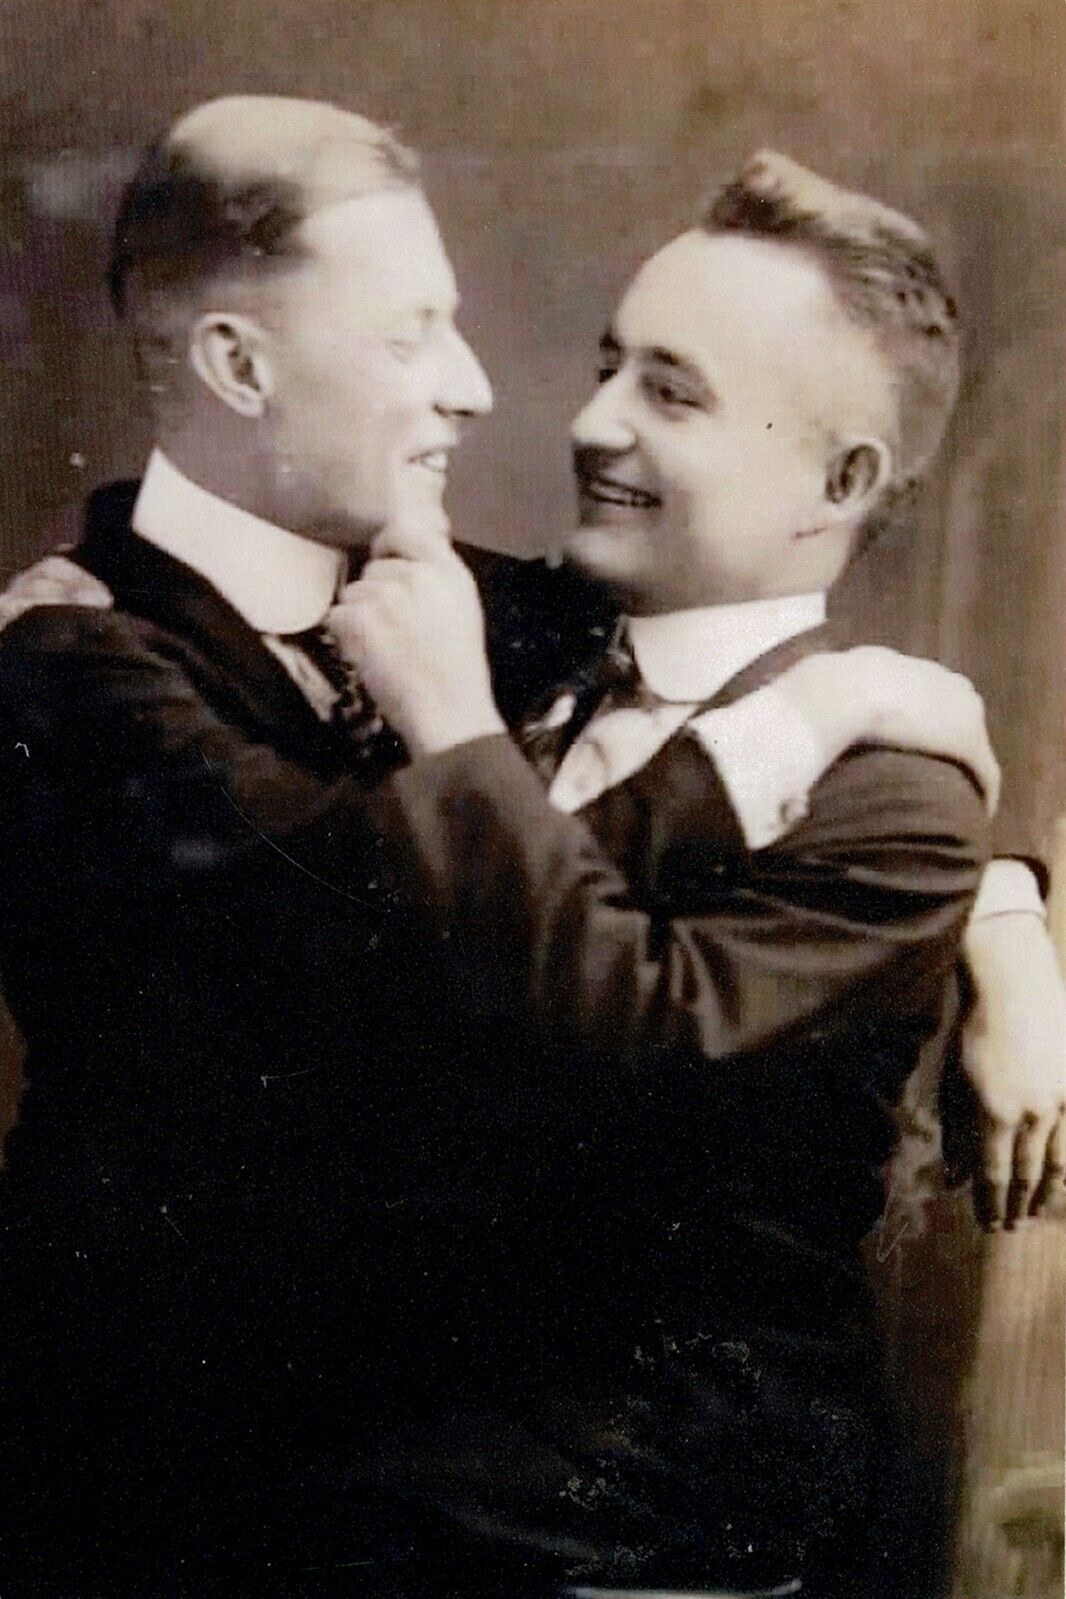 Two 1920s men hugging and smiling gay man's collection 4x6